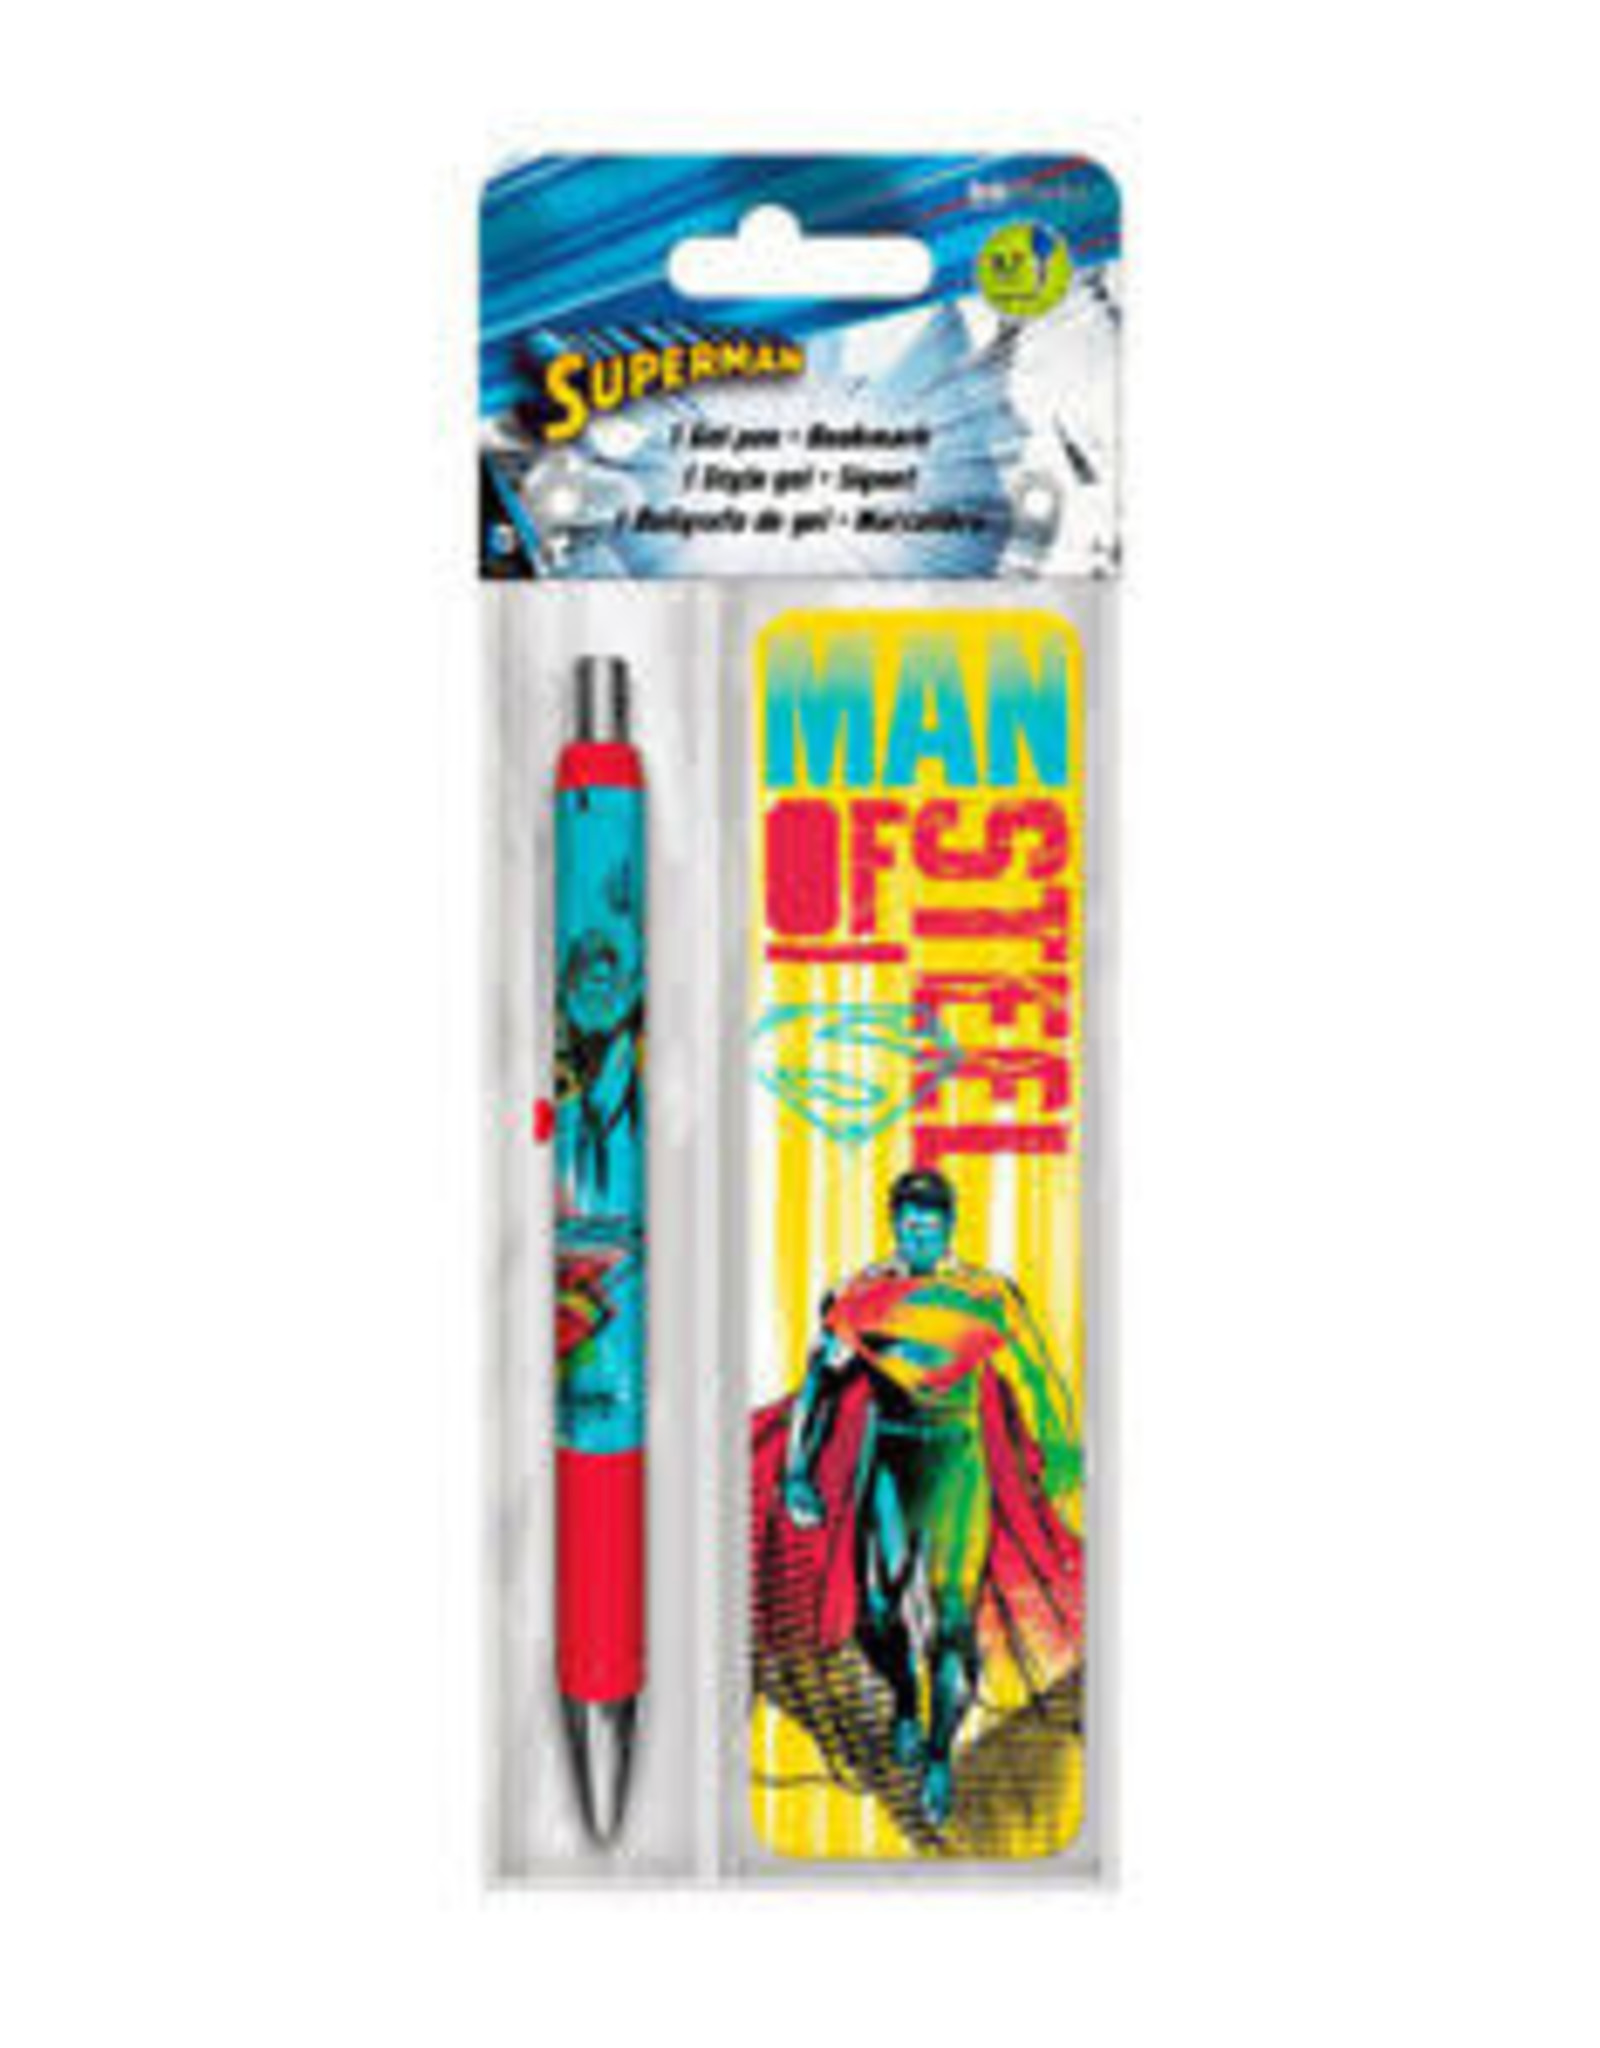 Superman Pen and Bookmark